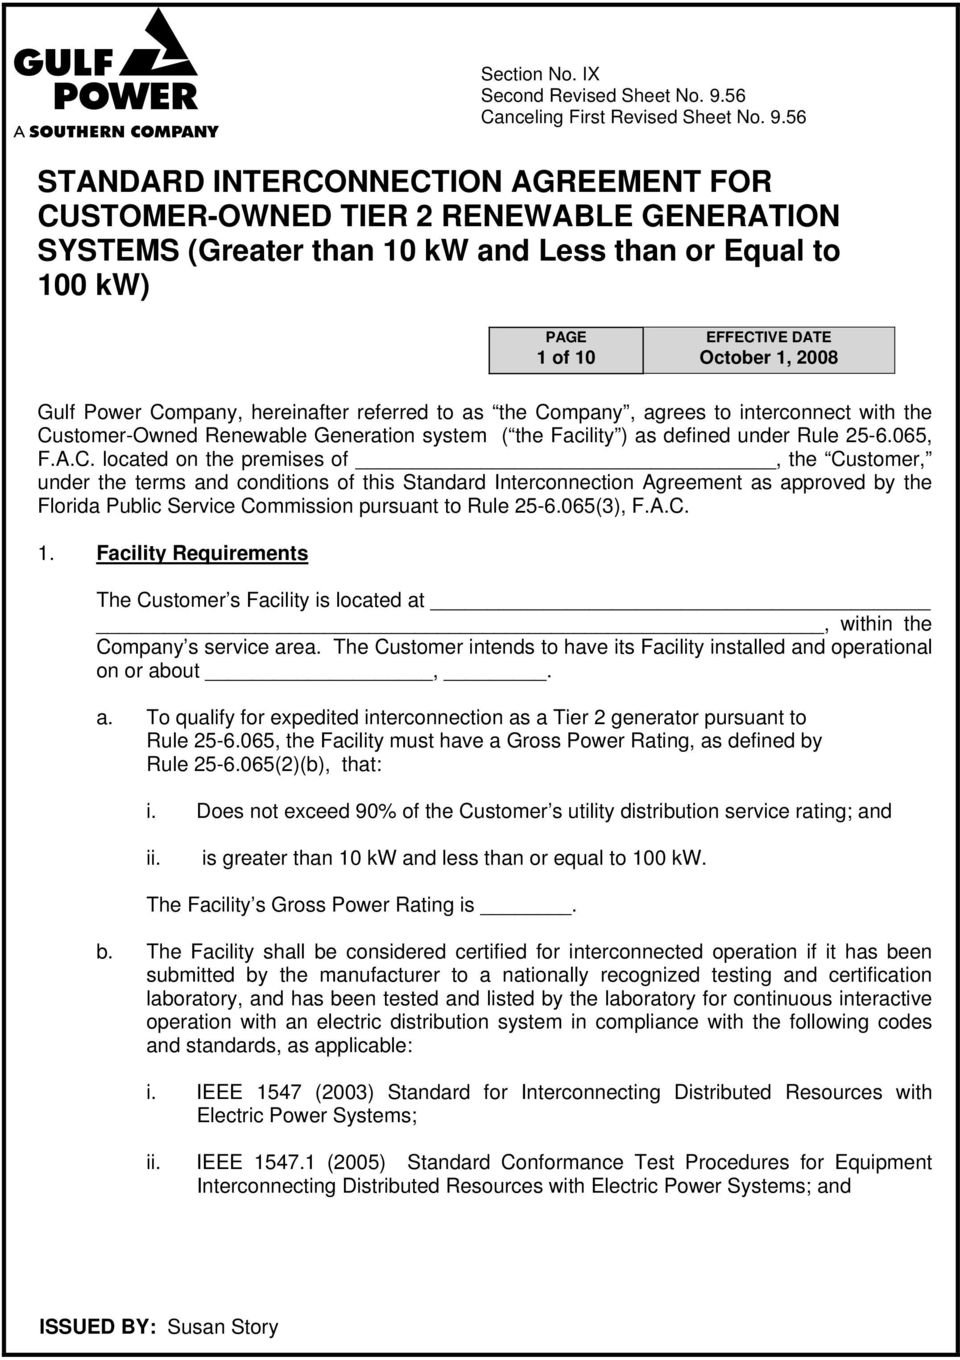 56 STANDARD INTERCONNECTION AGREEMENT FOR CUSTOMER-OWNED TIER 2 RENEWABLE GENERATION SYSTEMS (Greater than 10 kw and Less than or Equal to 100 kw) 1 of 10 Gulf Power Company, hereinafter referred to